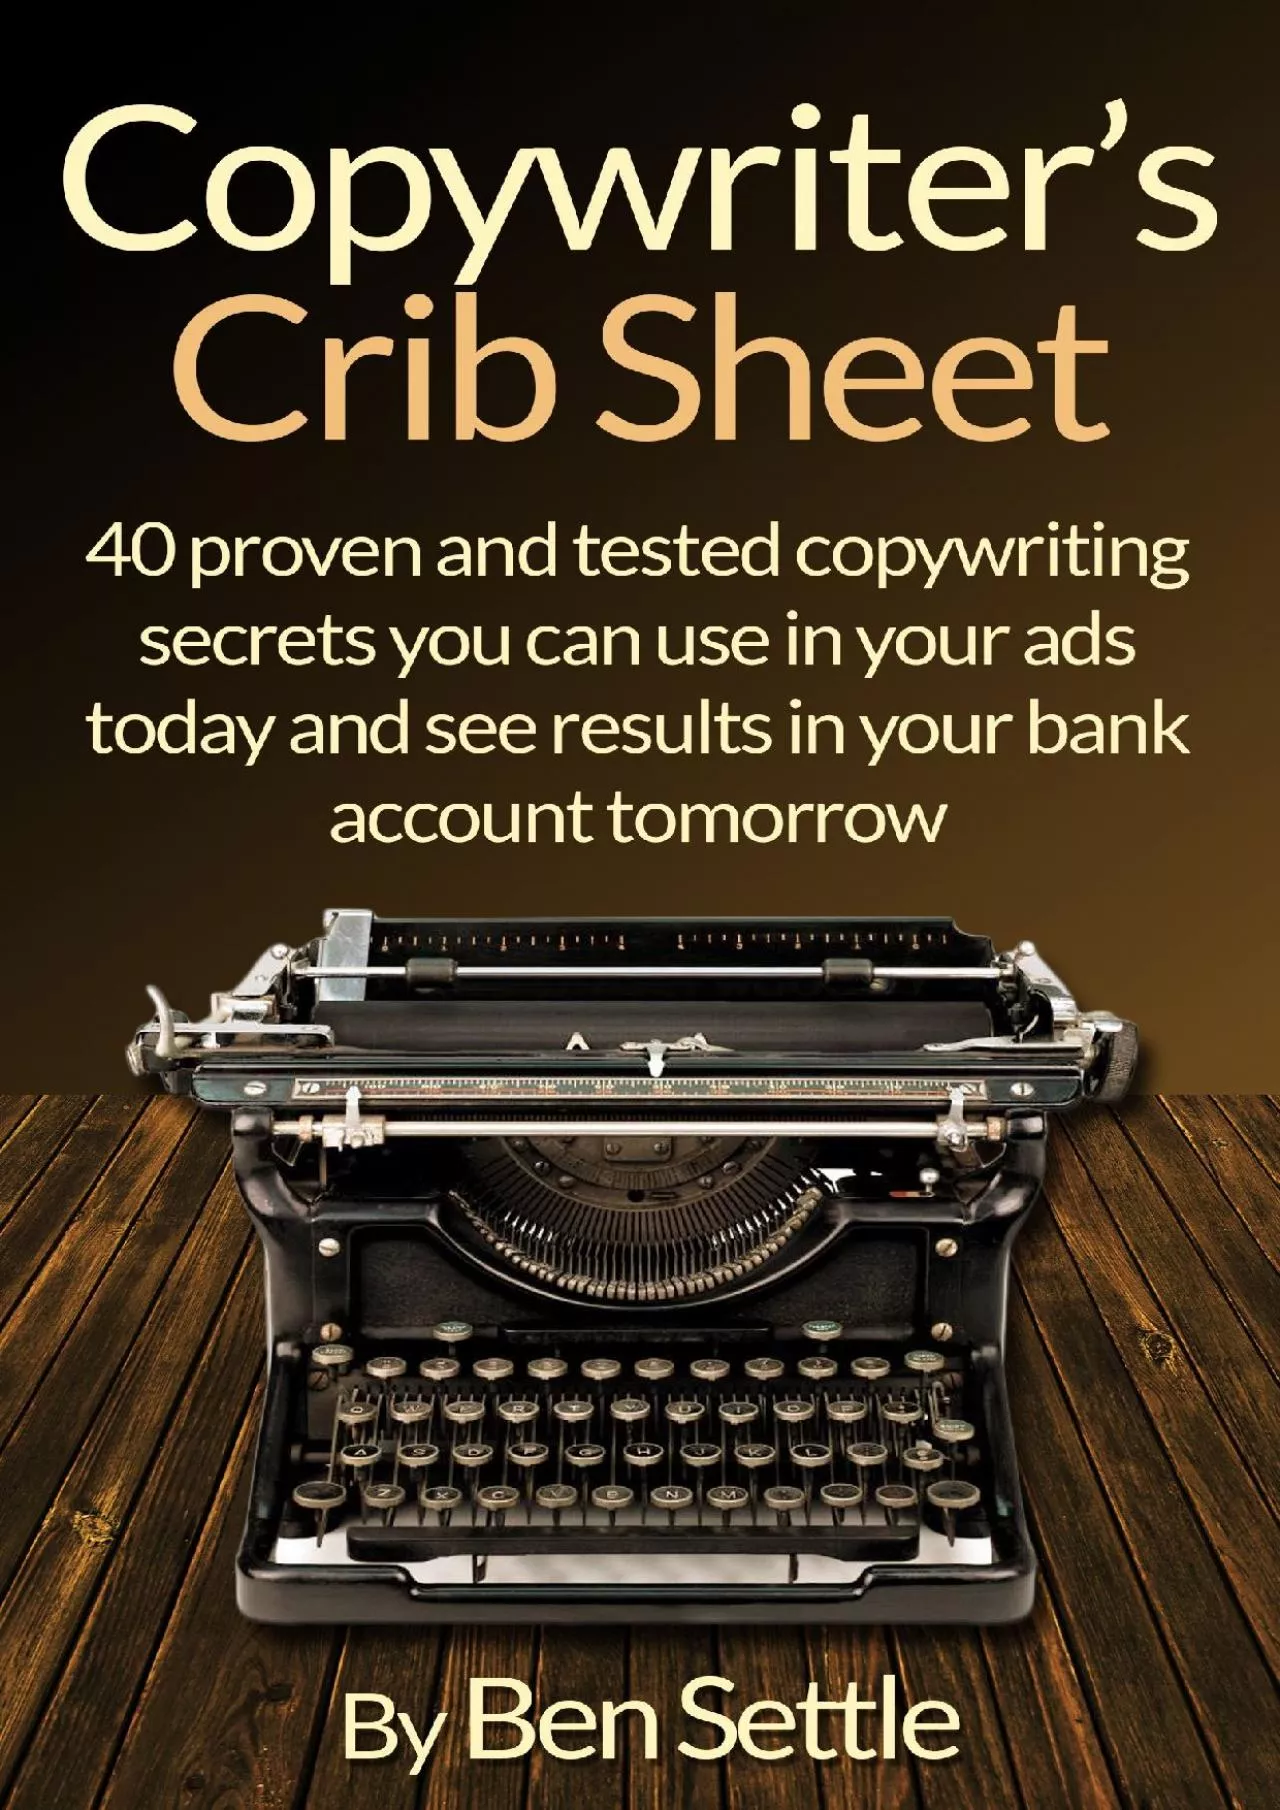 Copywriters Crib Sheet  40 Proven and Tested Copywriting Secrets You can use in Your Ads